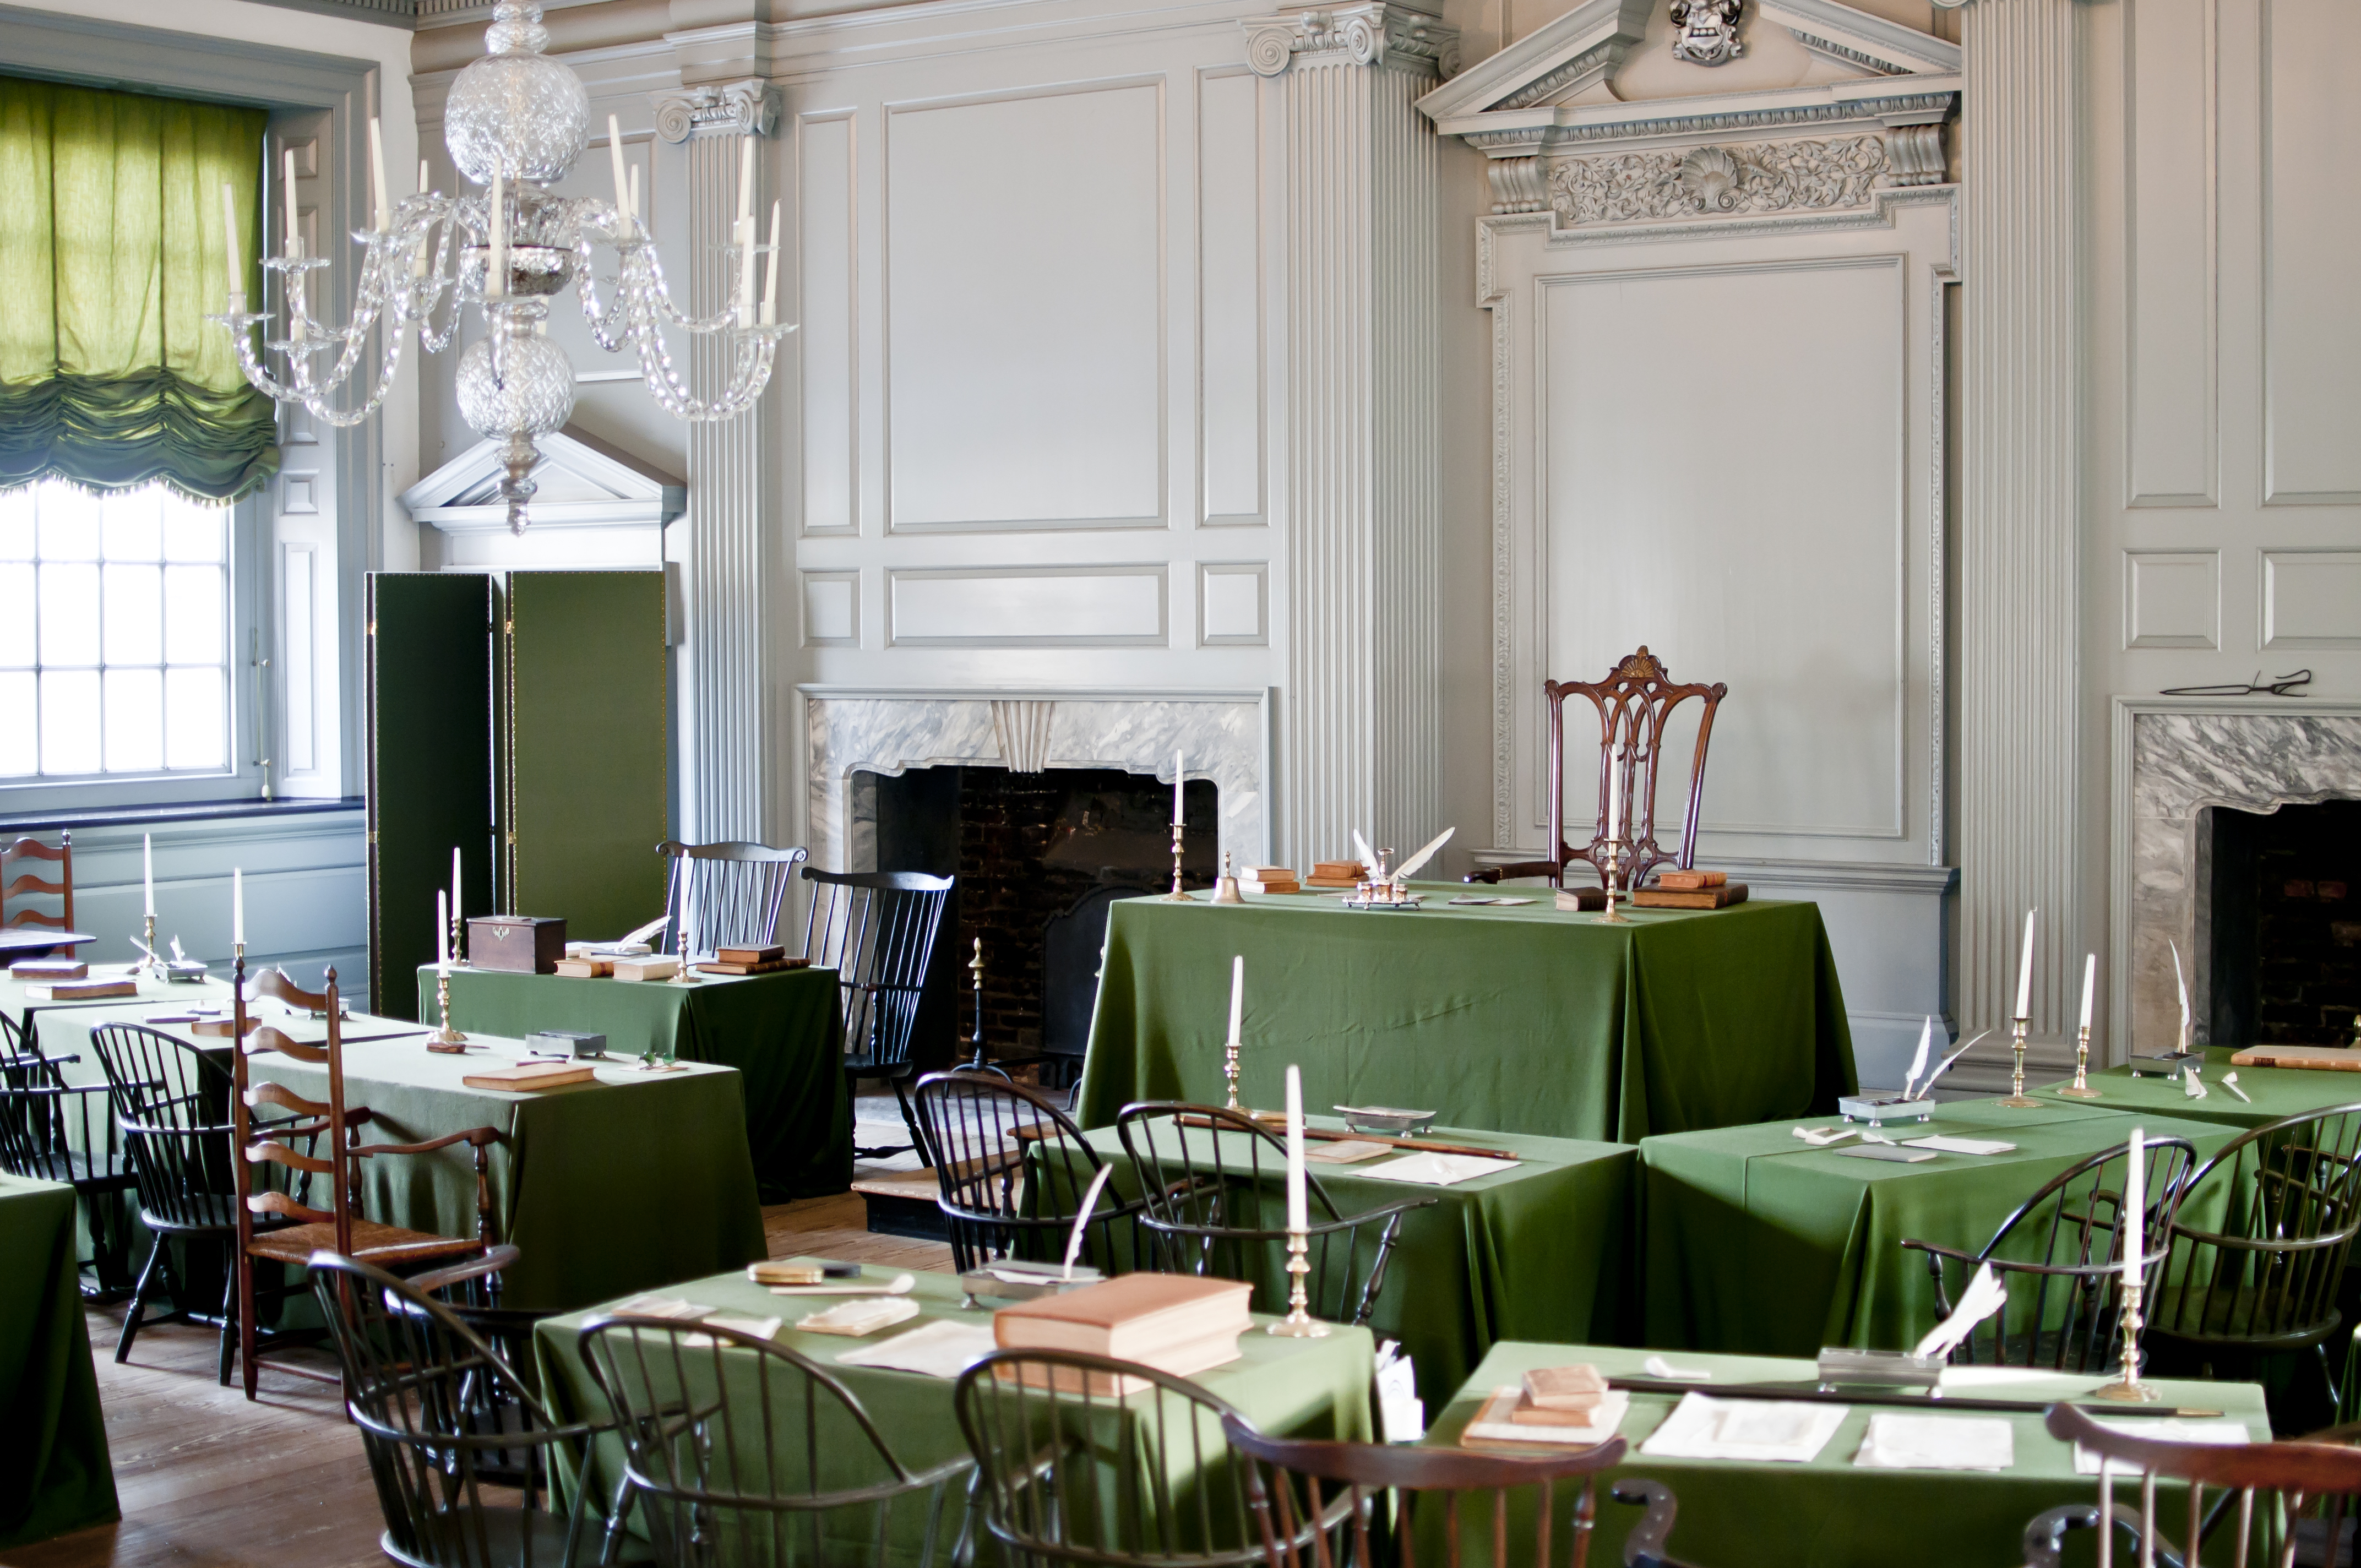 A color photo of the Assembly Room showing 18th century chairs and green, cloth covered tables